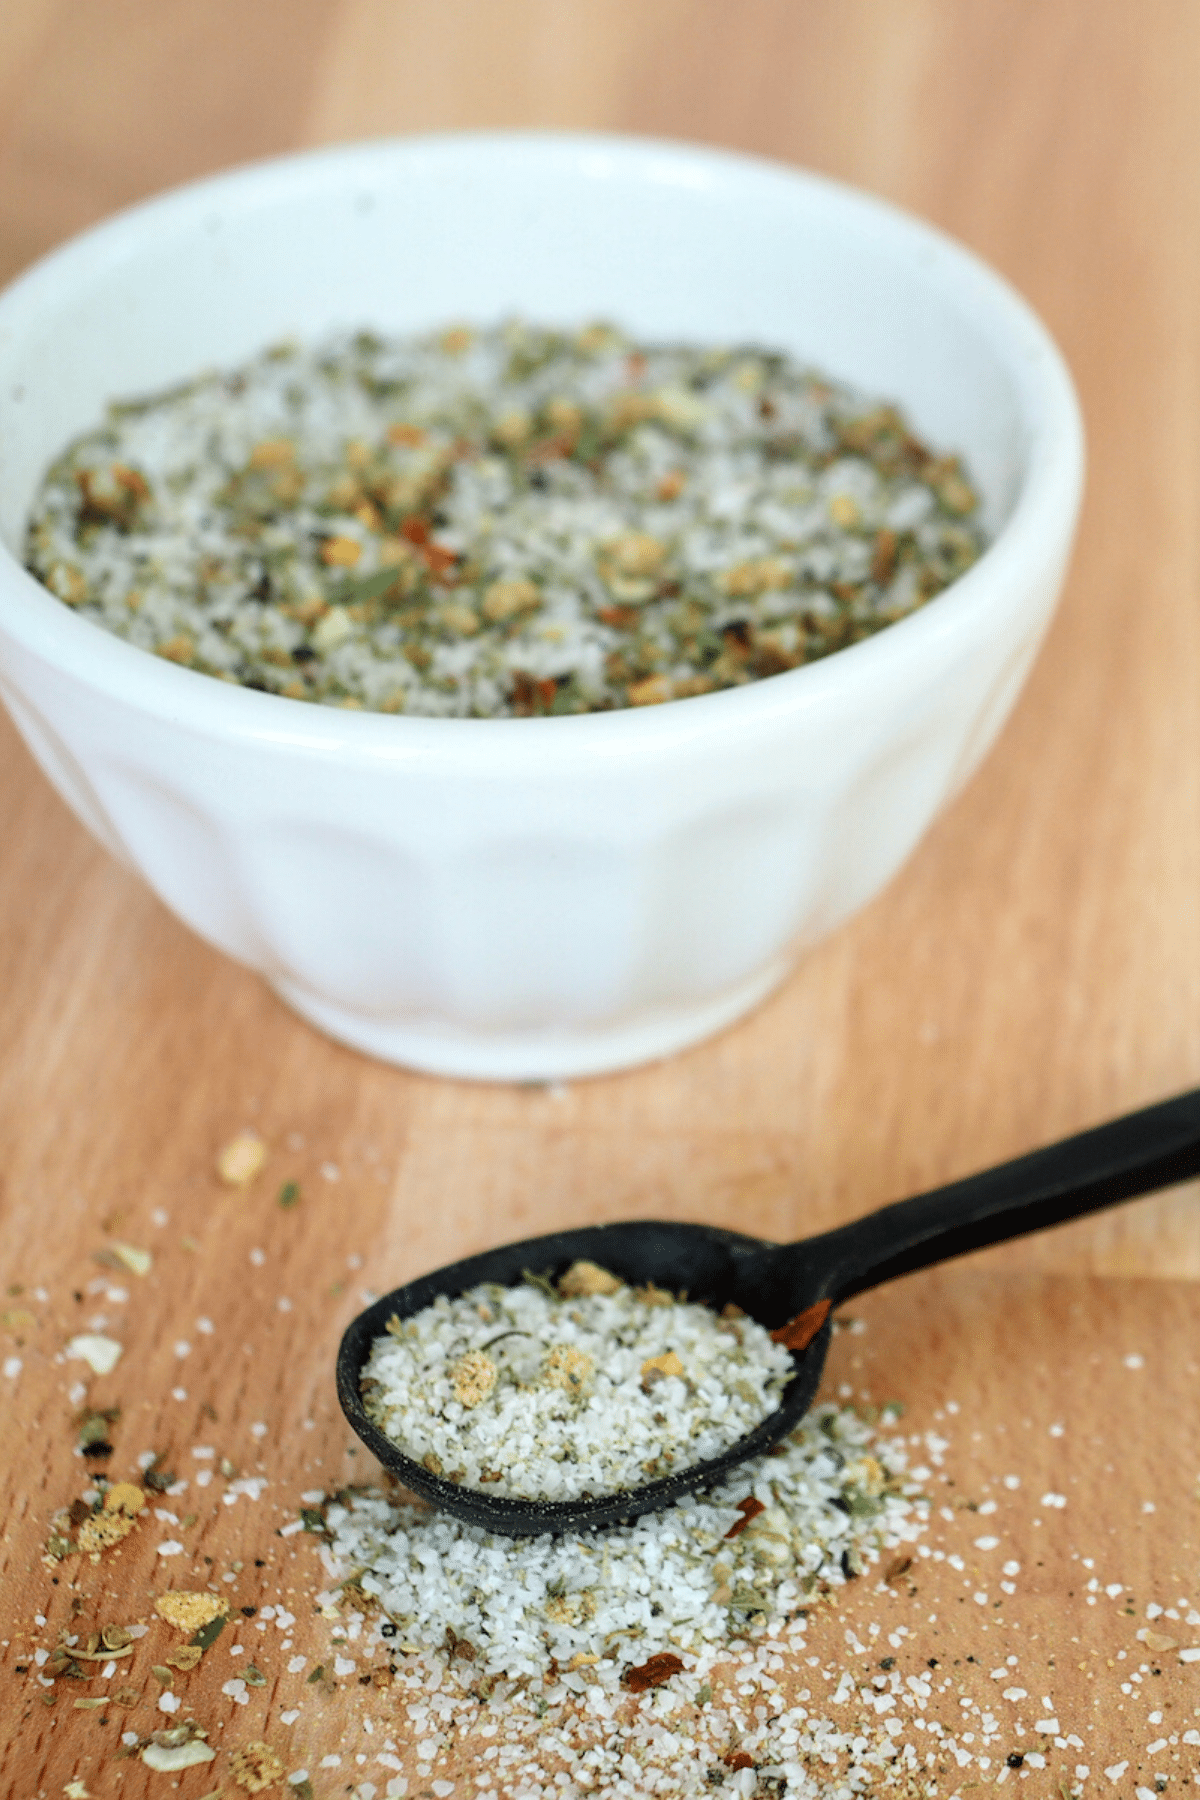 Image of bowl filled with Carrabba's grill seasoning with black spoon in front filled with seasoning.